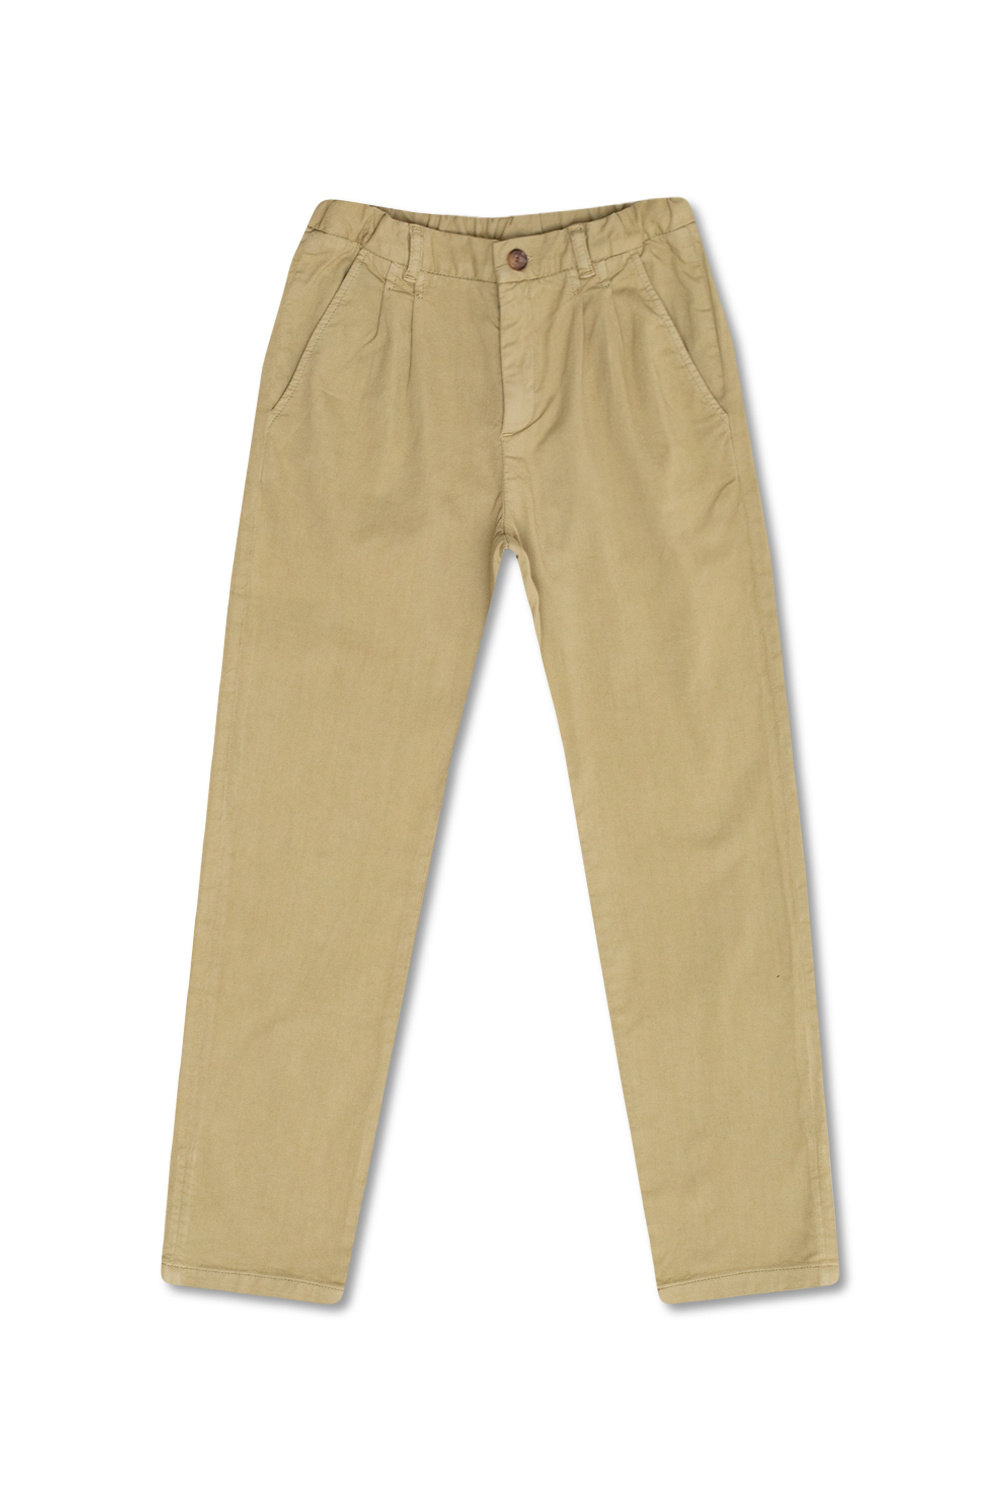 Bonpoint  trousers Hem with pockets